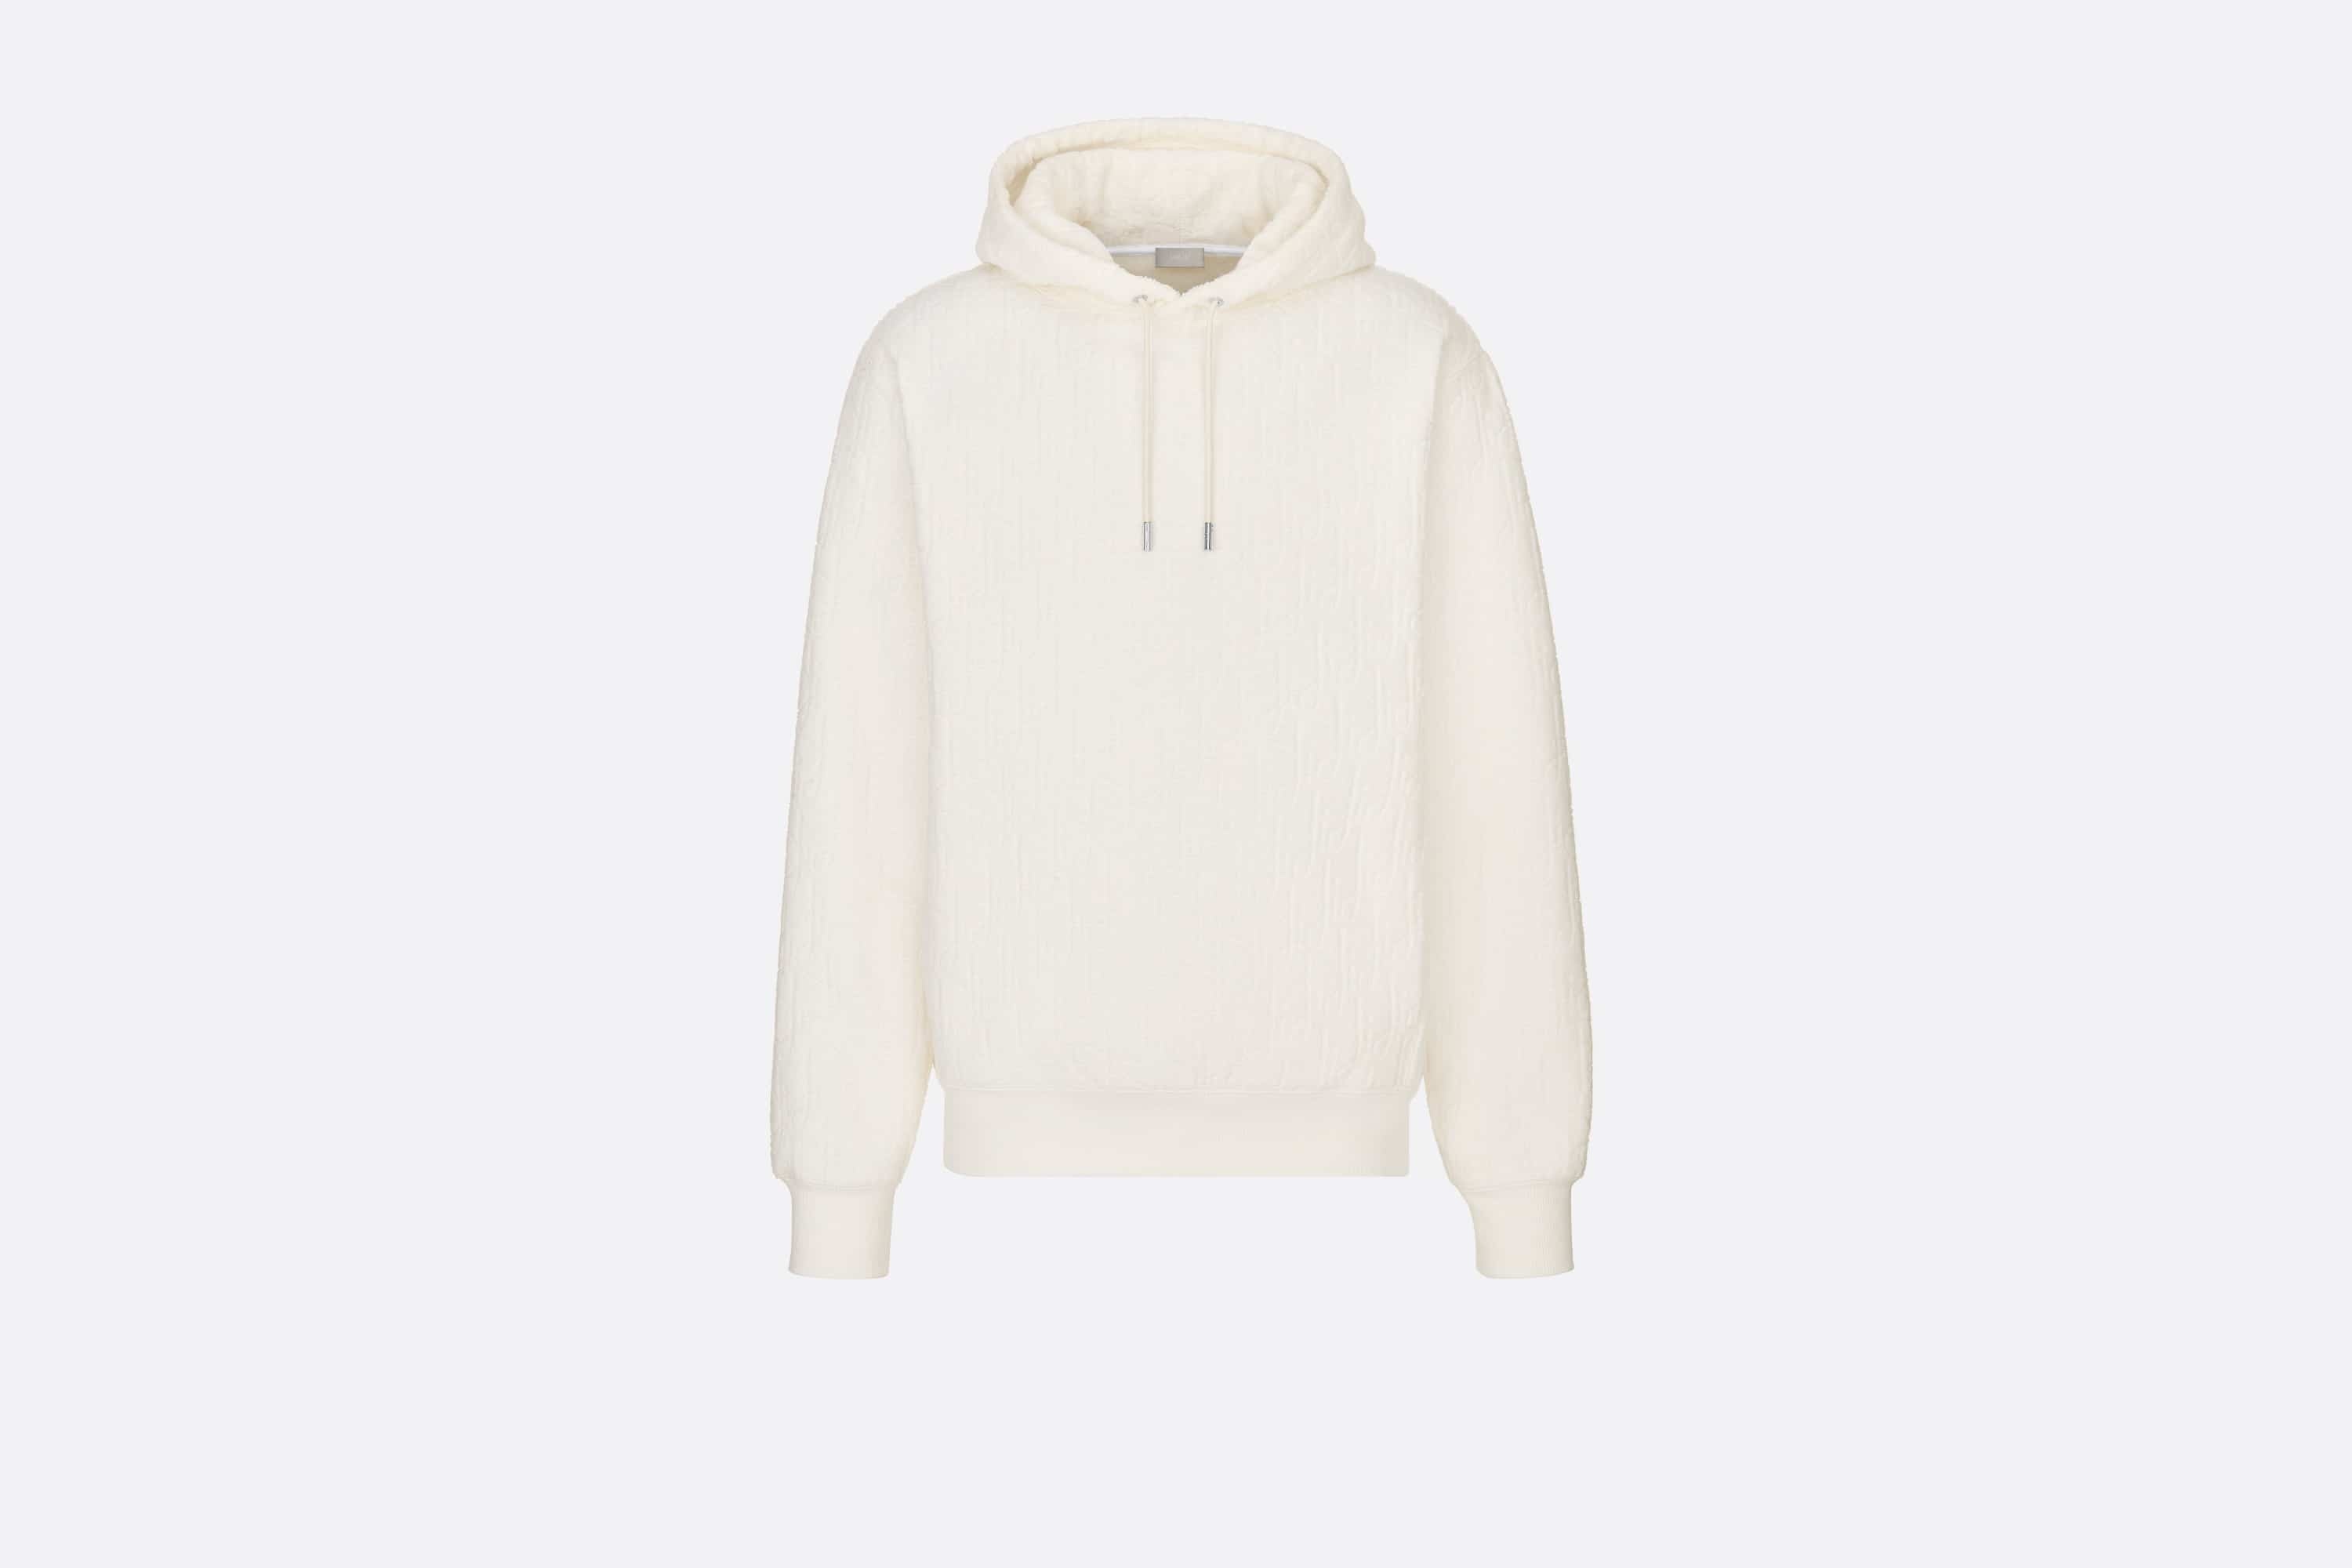 Dior Oblique Hooded Sweatshirt, Relaxed Fit - 1